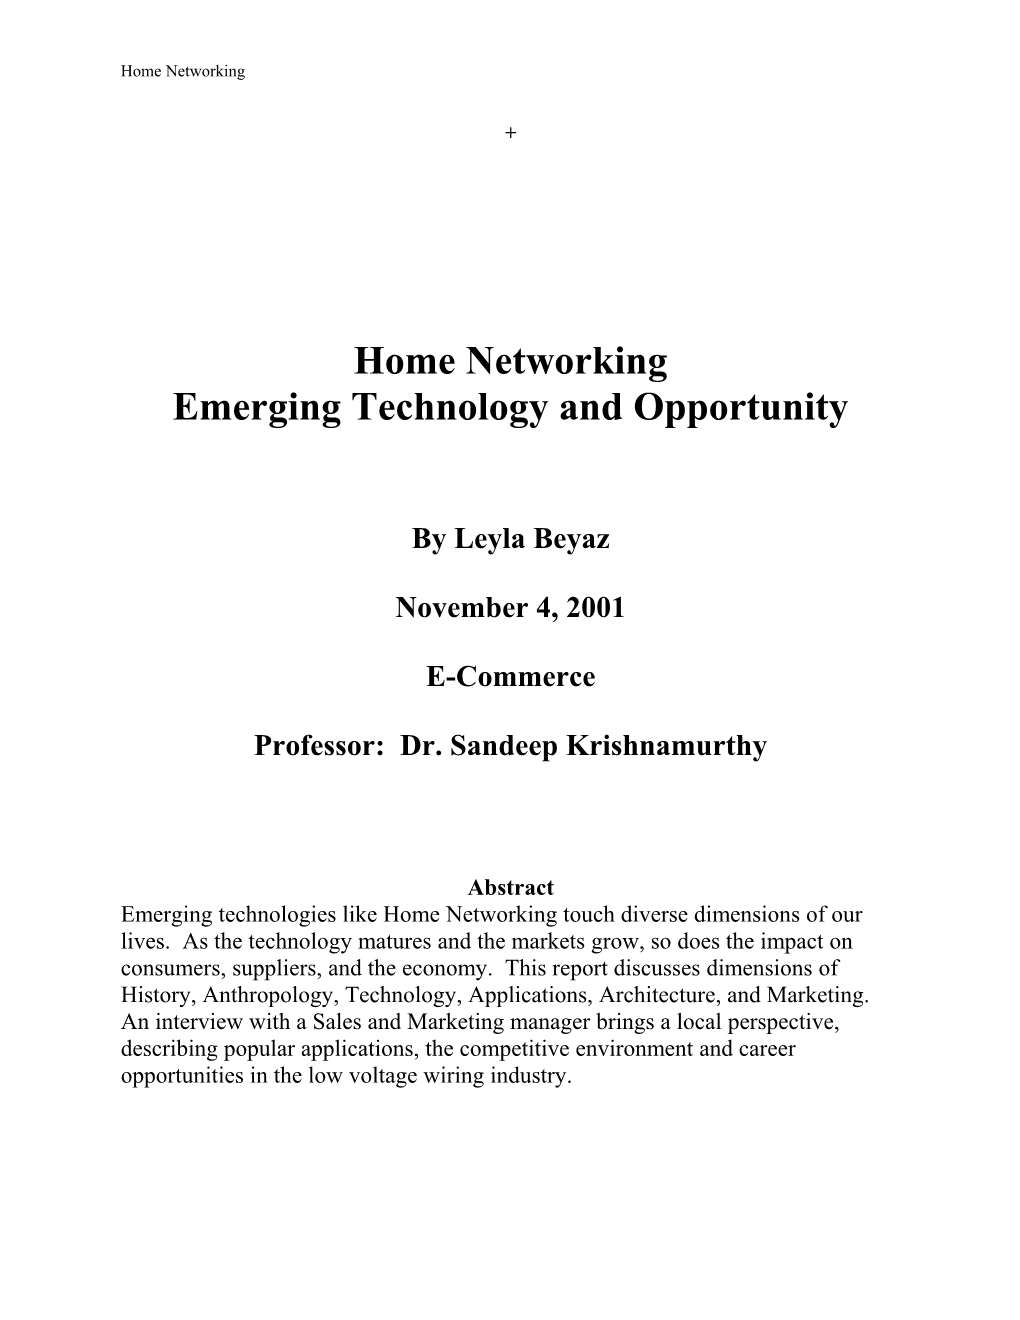 Home Networking - Technology & Opportunity